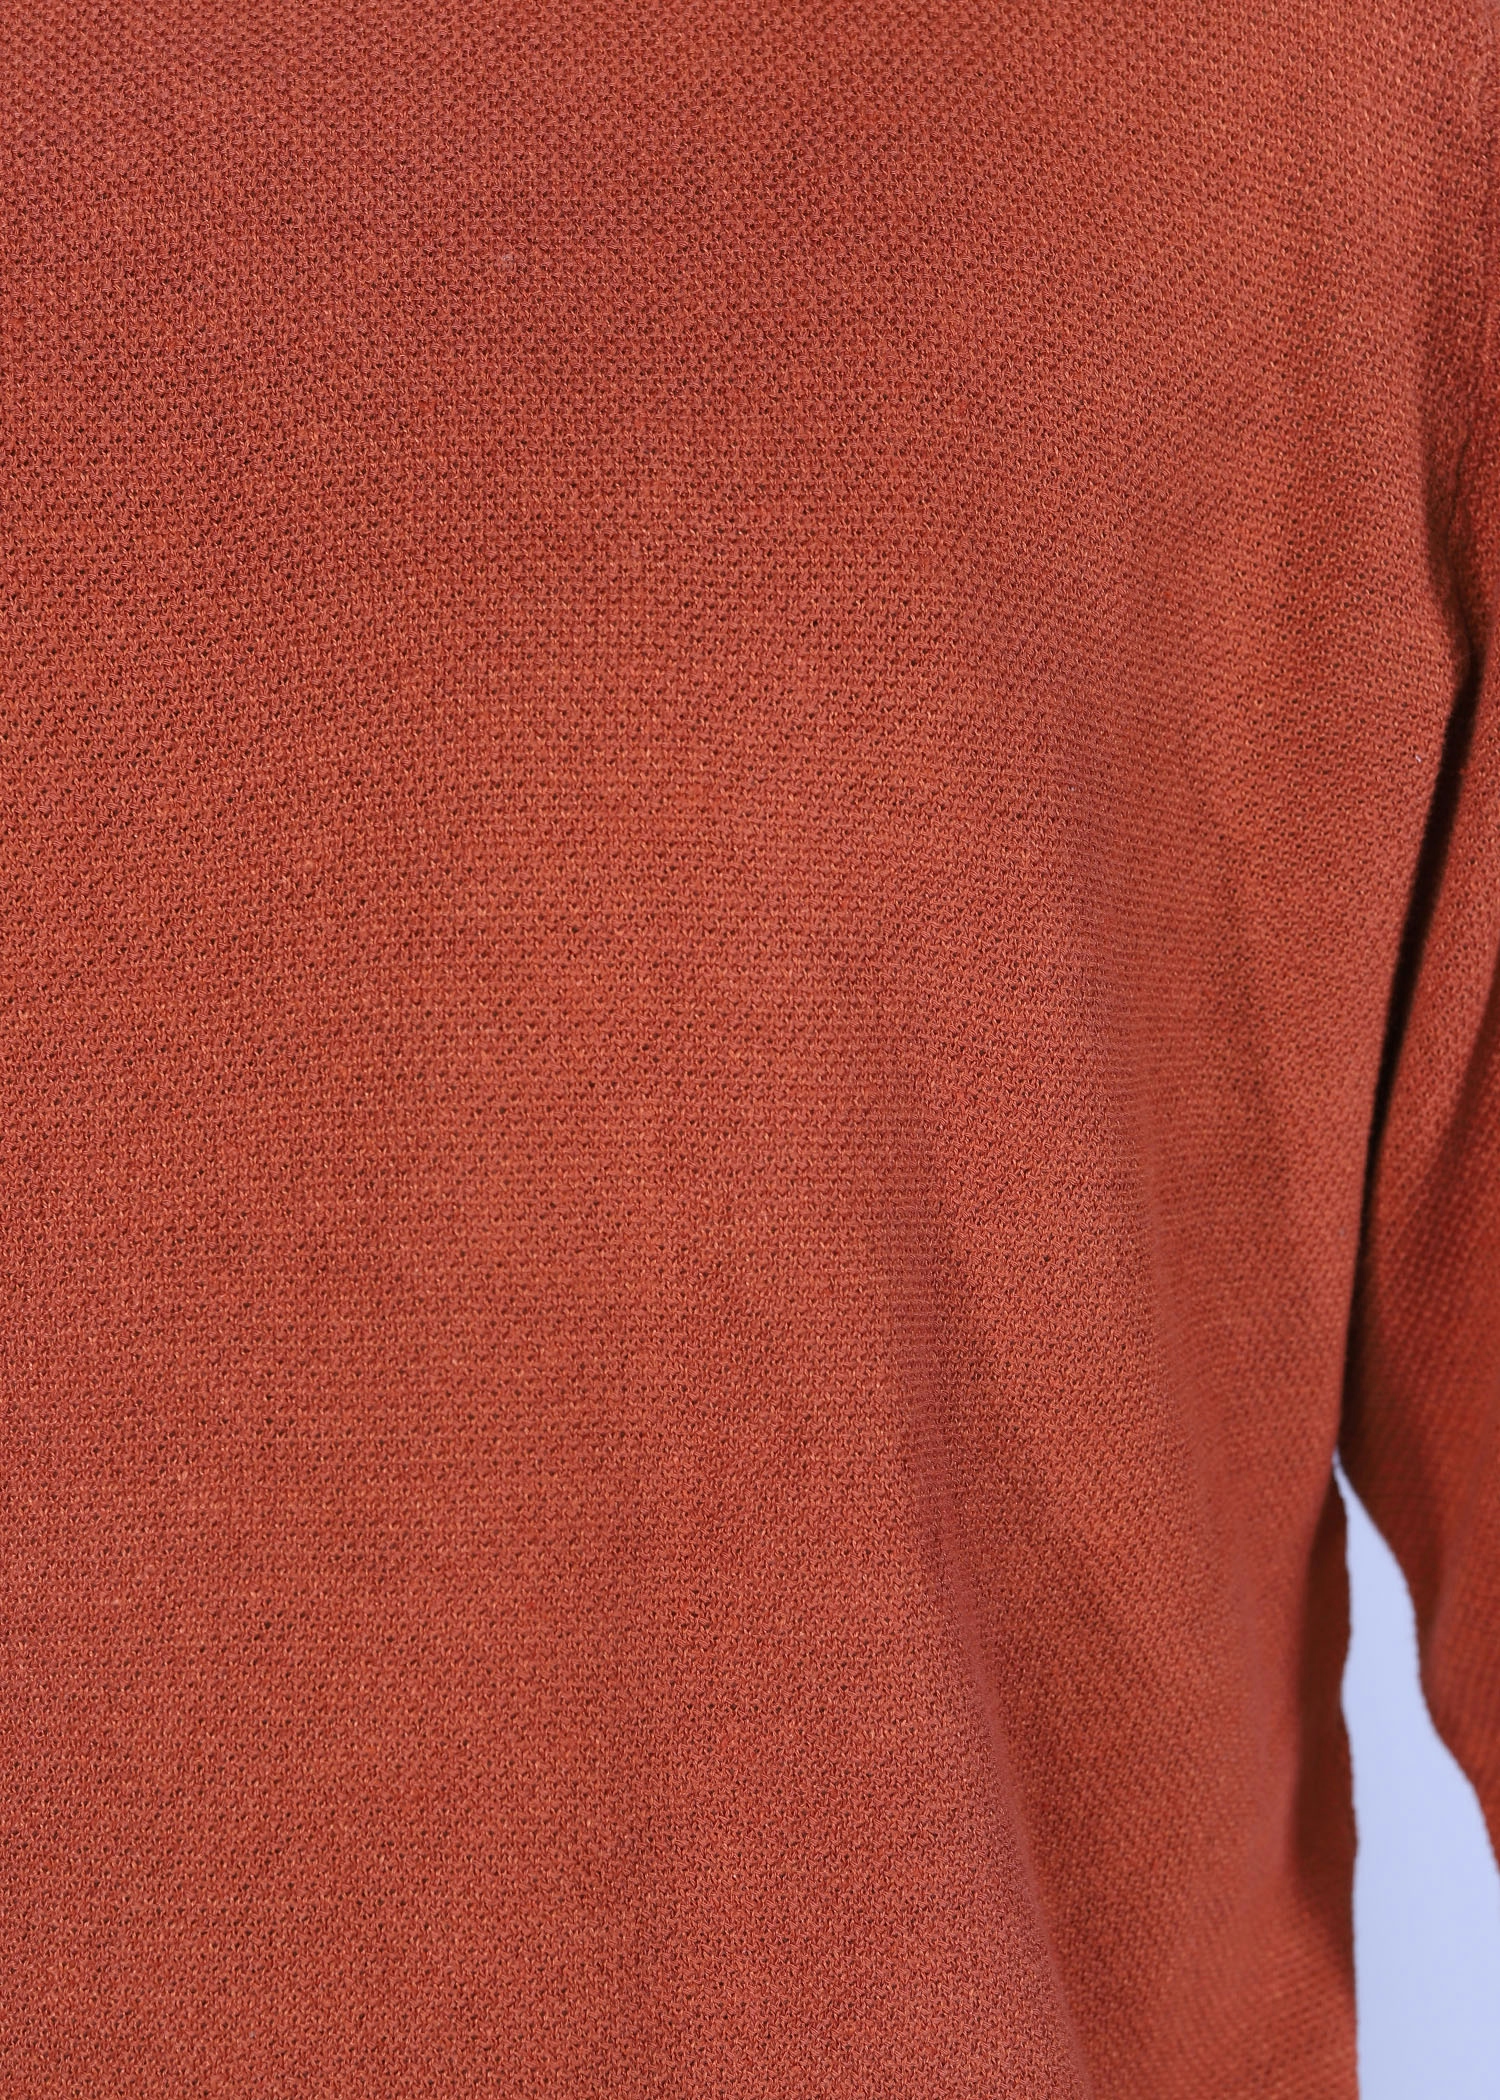 bougie bird sweater rust color close front view